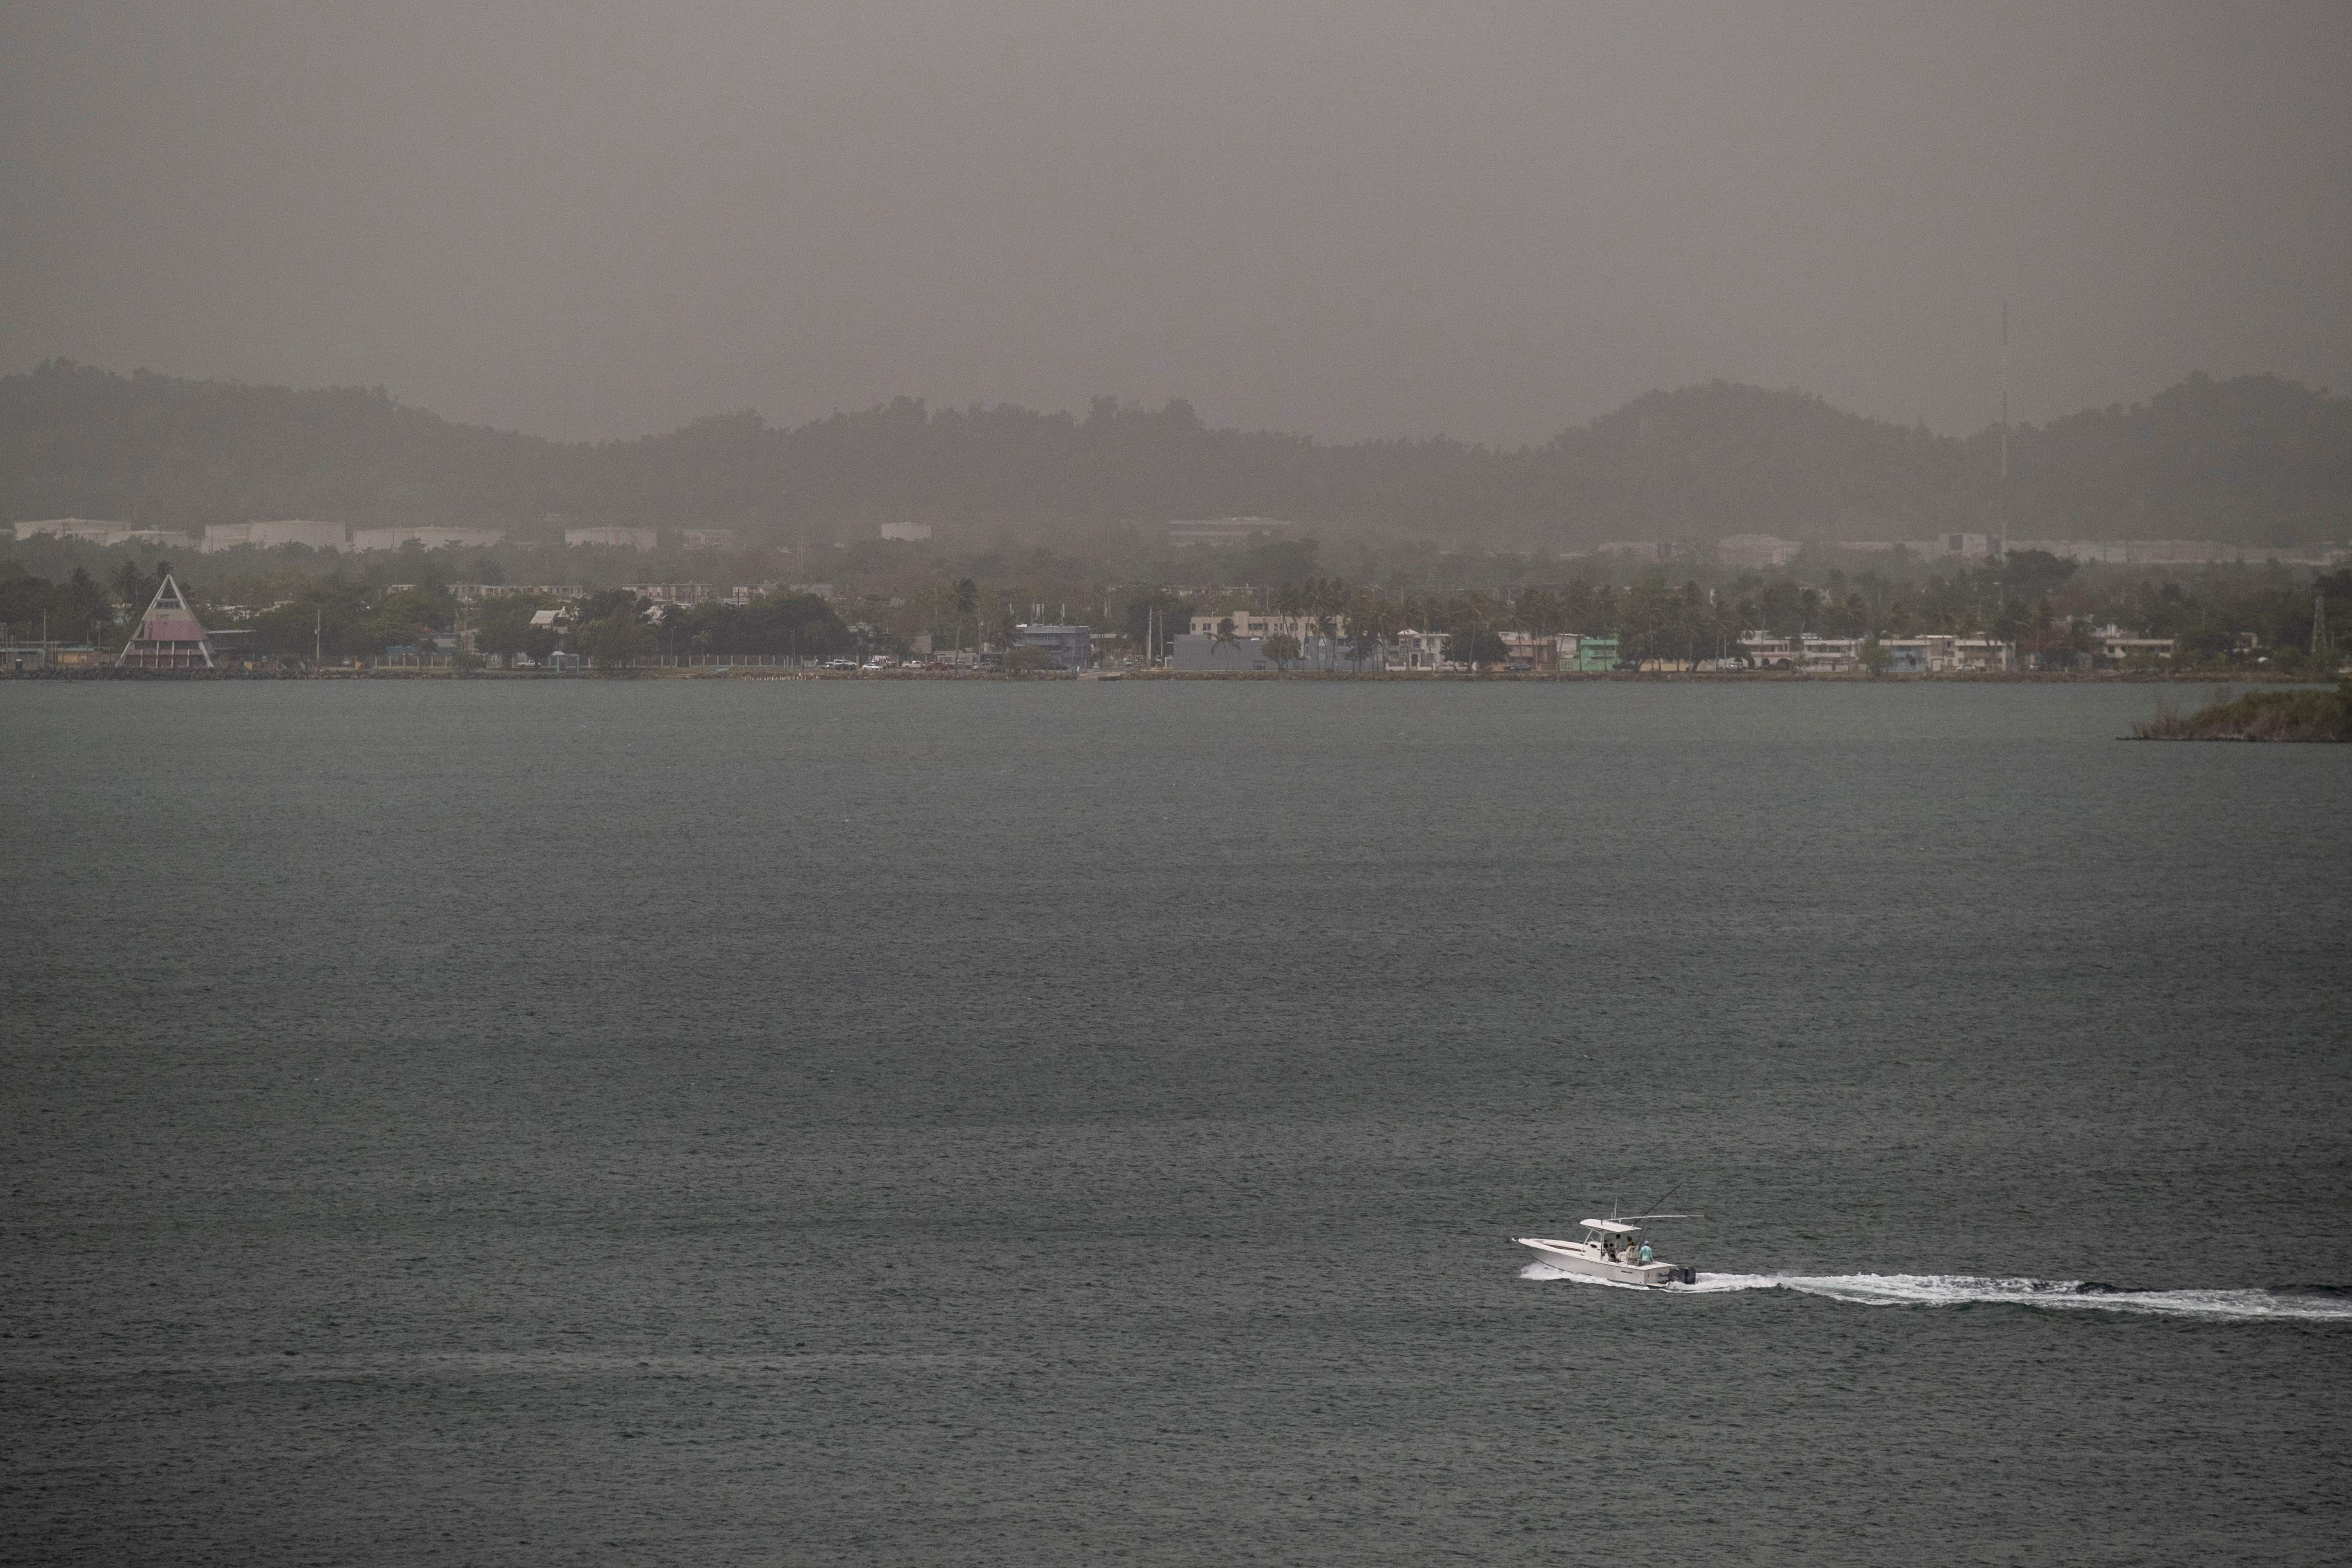 A boat speeds across a bay in front of a shoreline enveloped in a haze. The air is gray, and the mountains and buildings are barely visible.